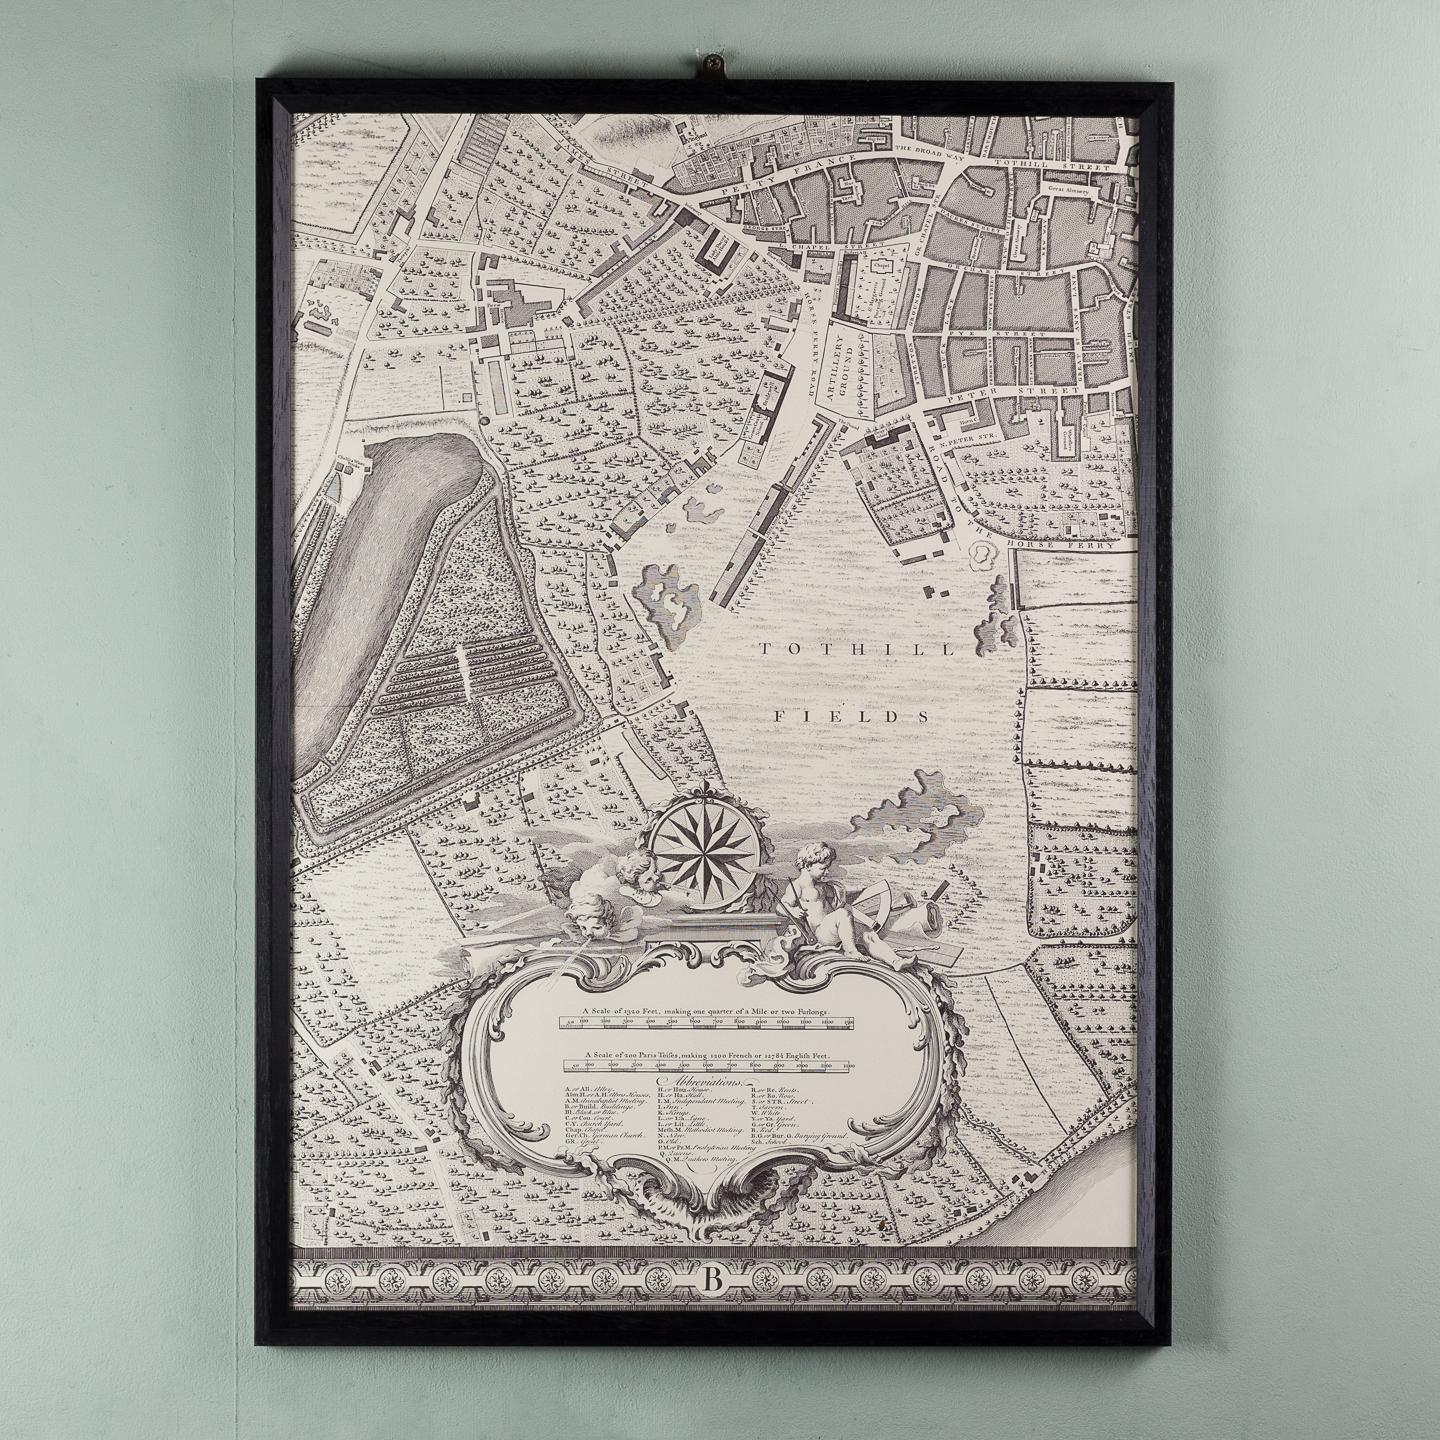 Huge John Rocque Map of London 1746, Republished By Harry Margary 8